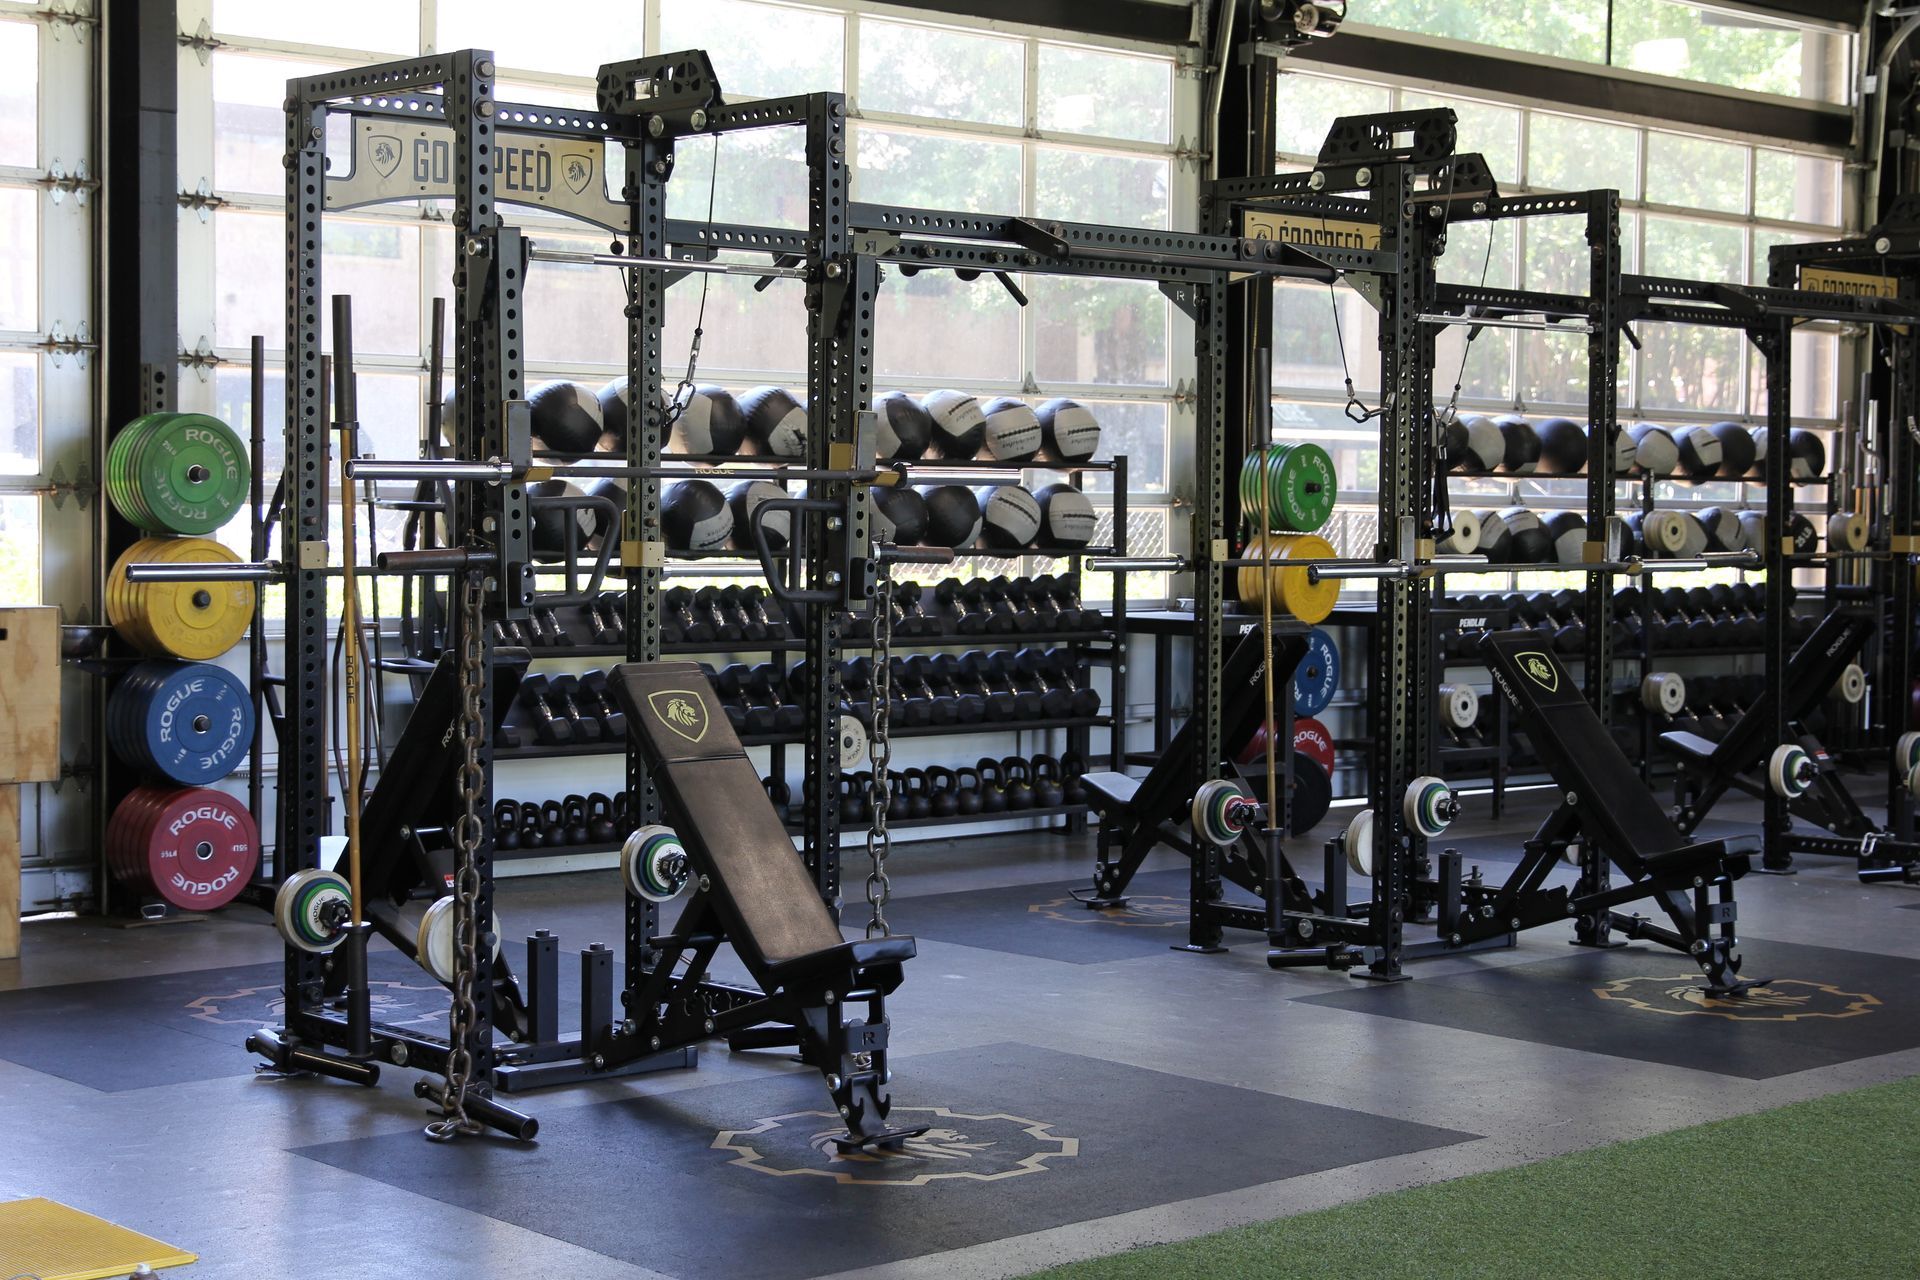 A gym filled with lots of exercise equipment and dumbbells.